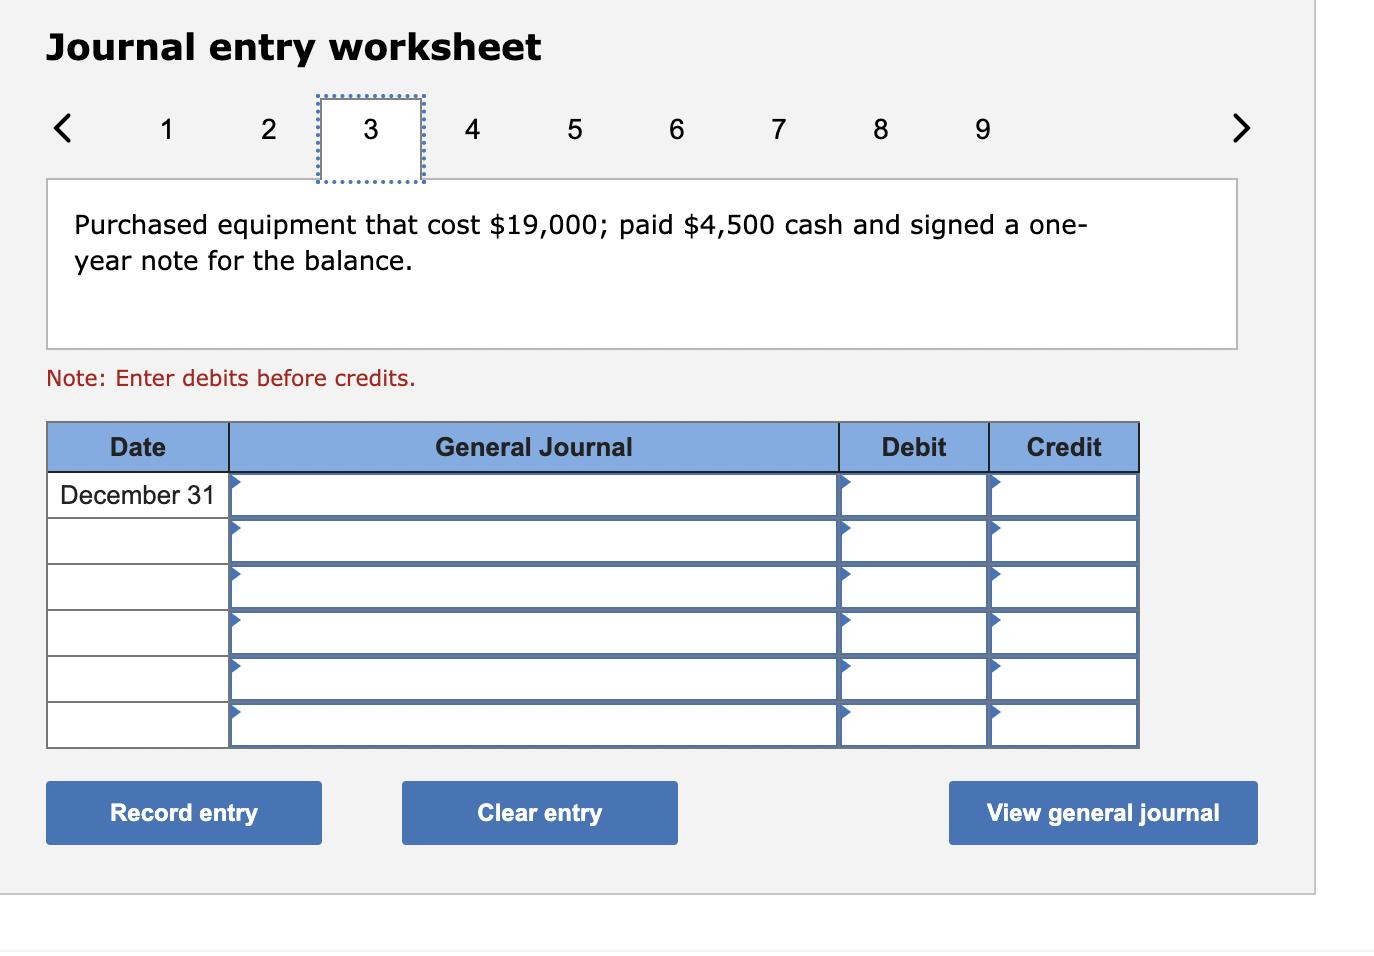 Journal entry worksheet Purchased equipment that cost ( $ 19,000 ); paid ( $ 4,500 ) cash and signed a oneyear note for